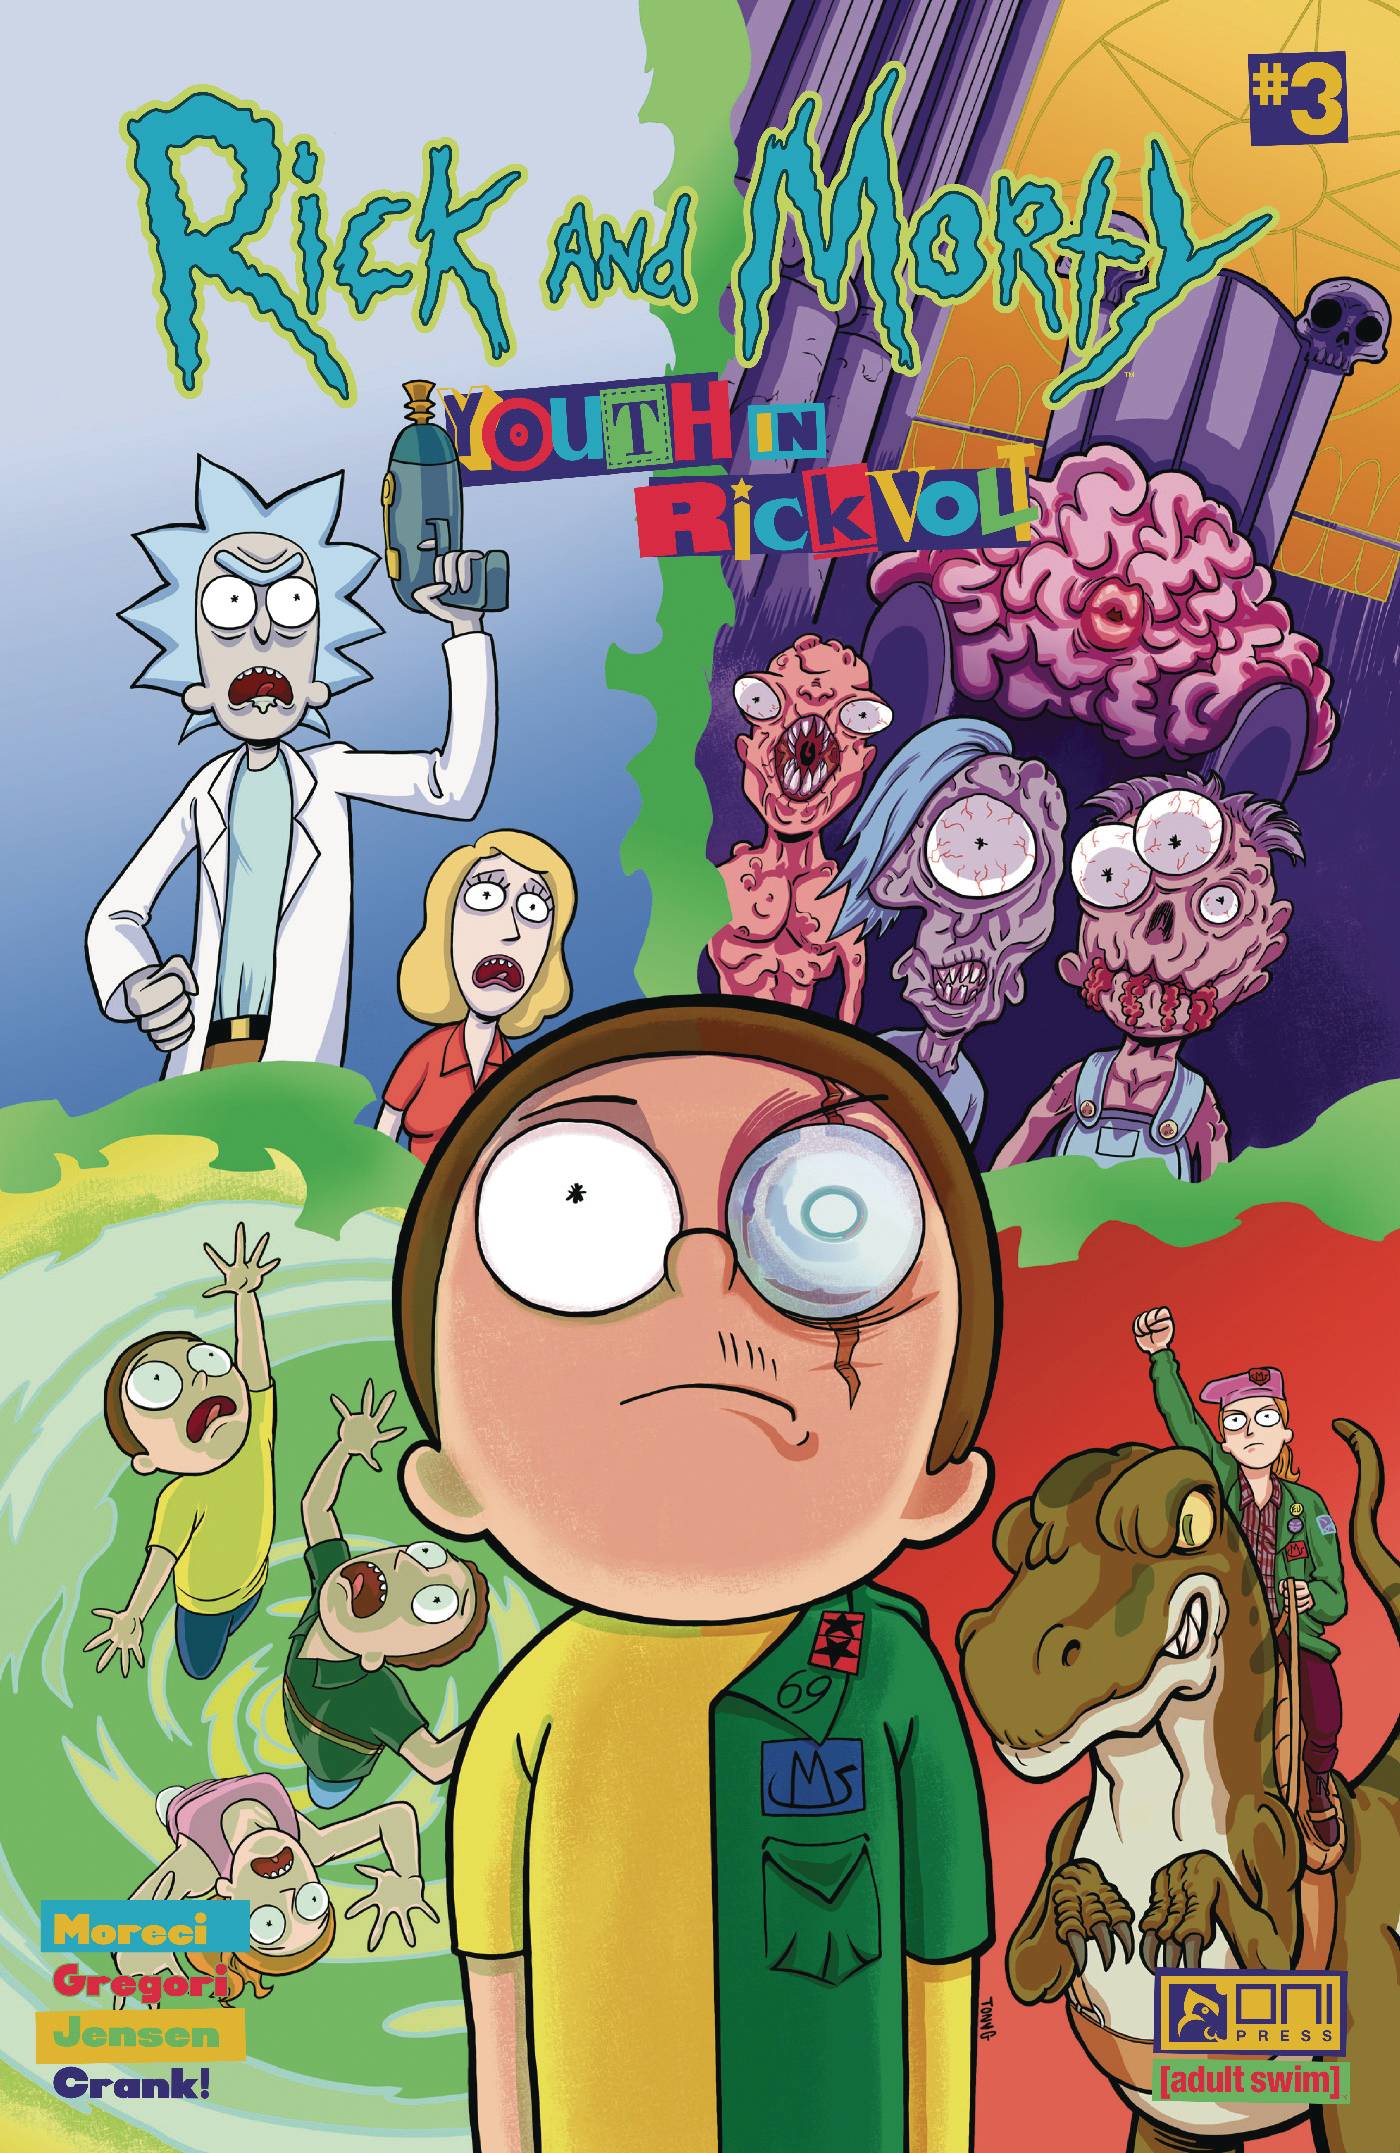 Rick and Morty: Youth in Rickvolt #3 (2024)